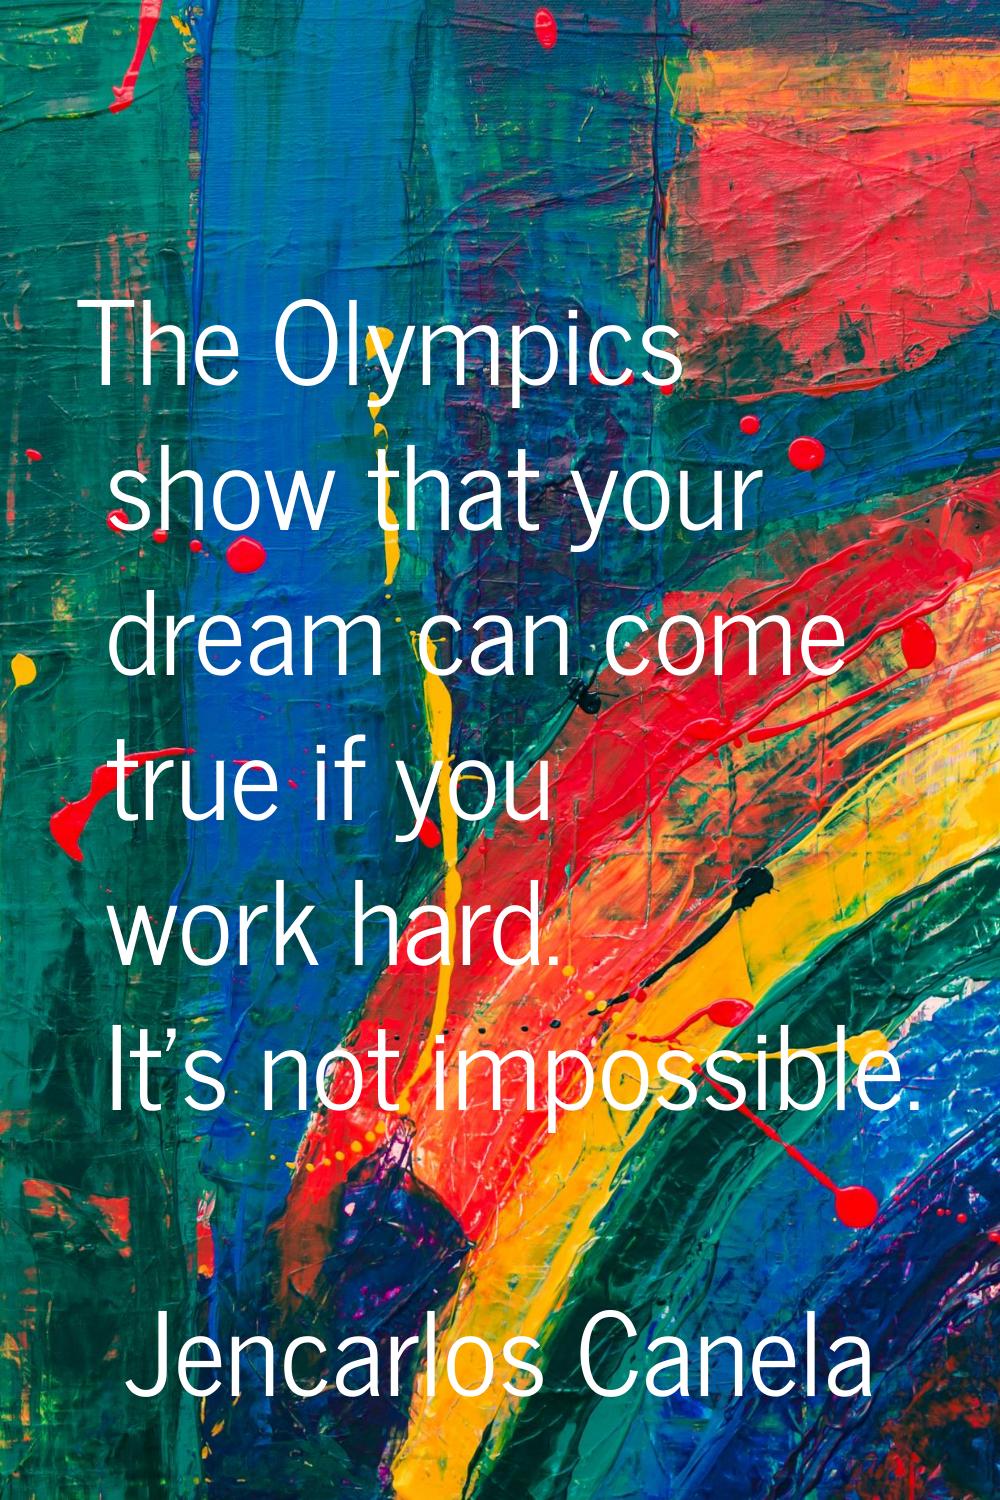 The Olympics show that your dream can come true if you work hard. It's not impossible.